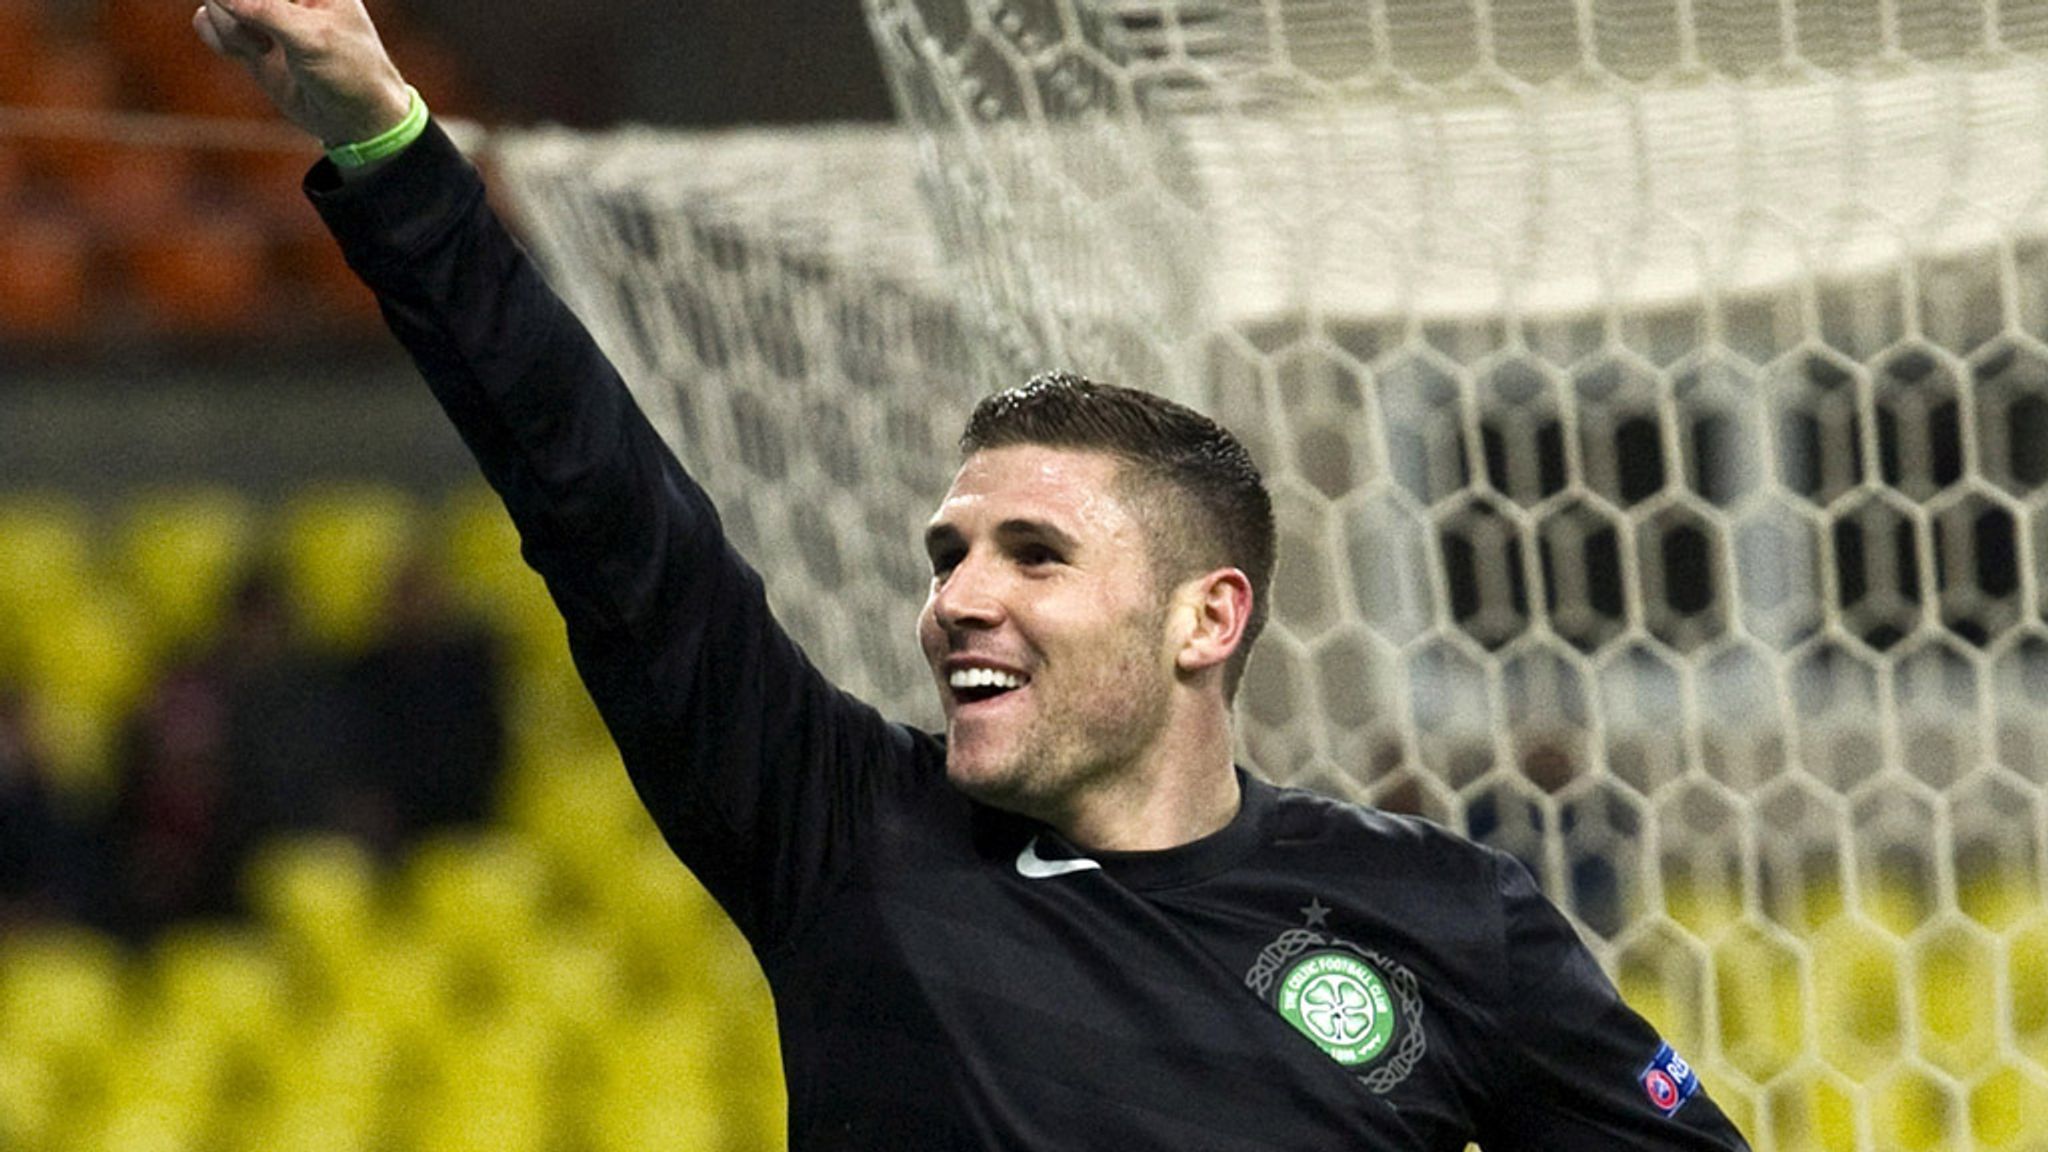 Celtic manager Neil Lennon to press ahead with contract talks for Gary Hooper